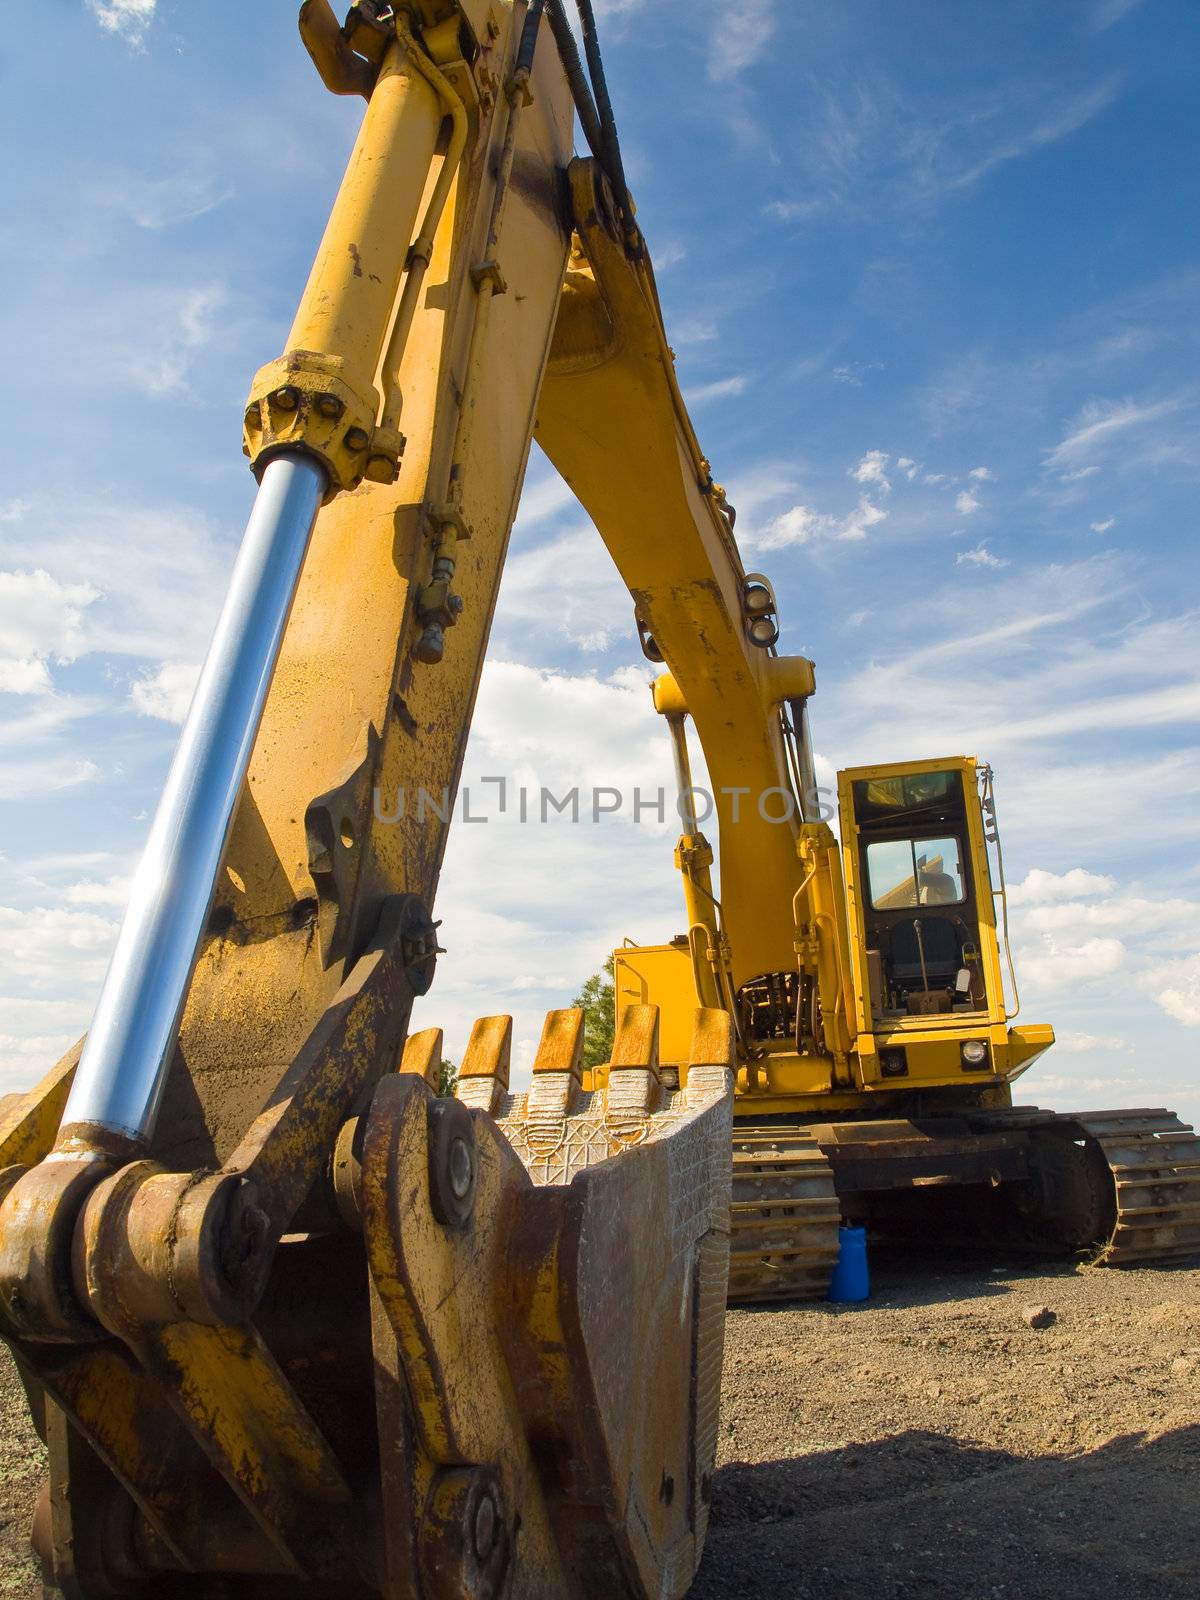 Heavy Duty Construction Equipment Parked at Worksite 